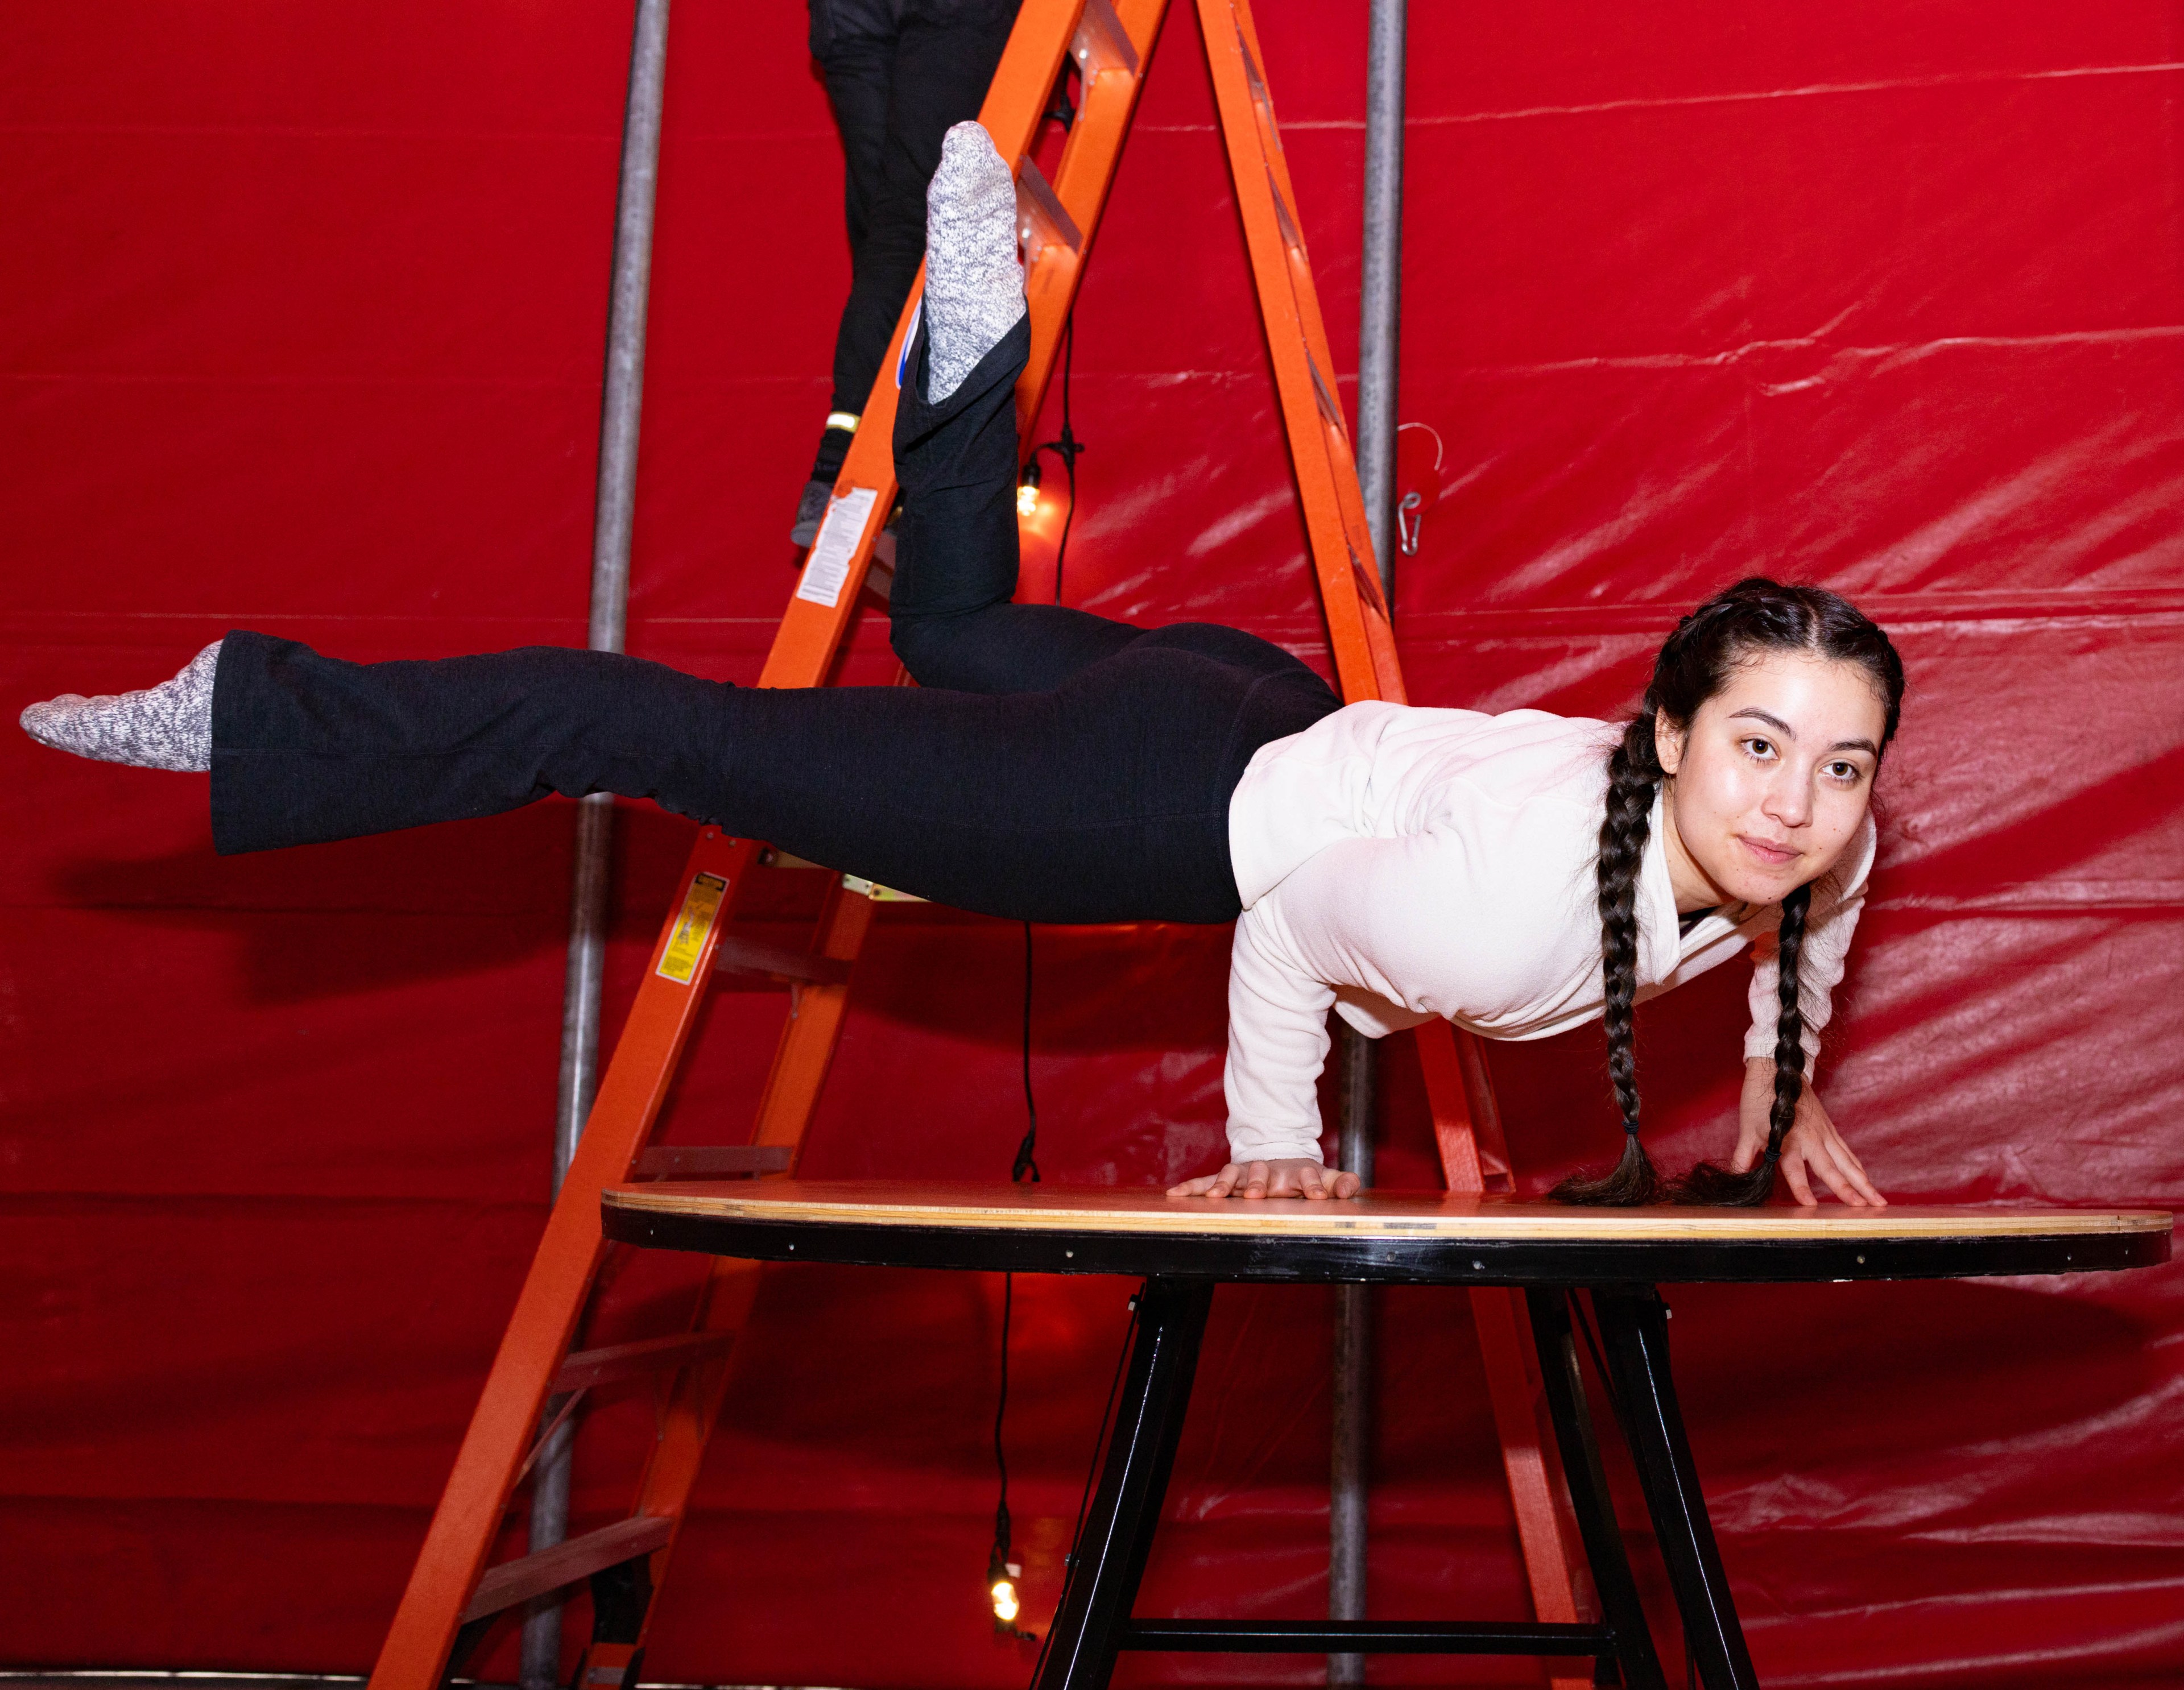 A person on their hands and legs in the air on top of a table inside a red tent.